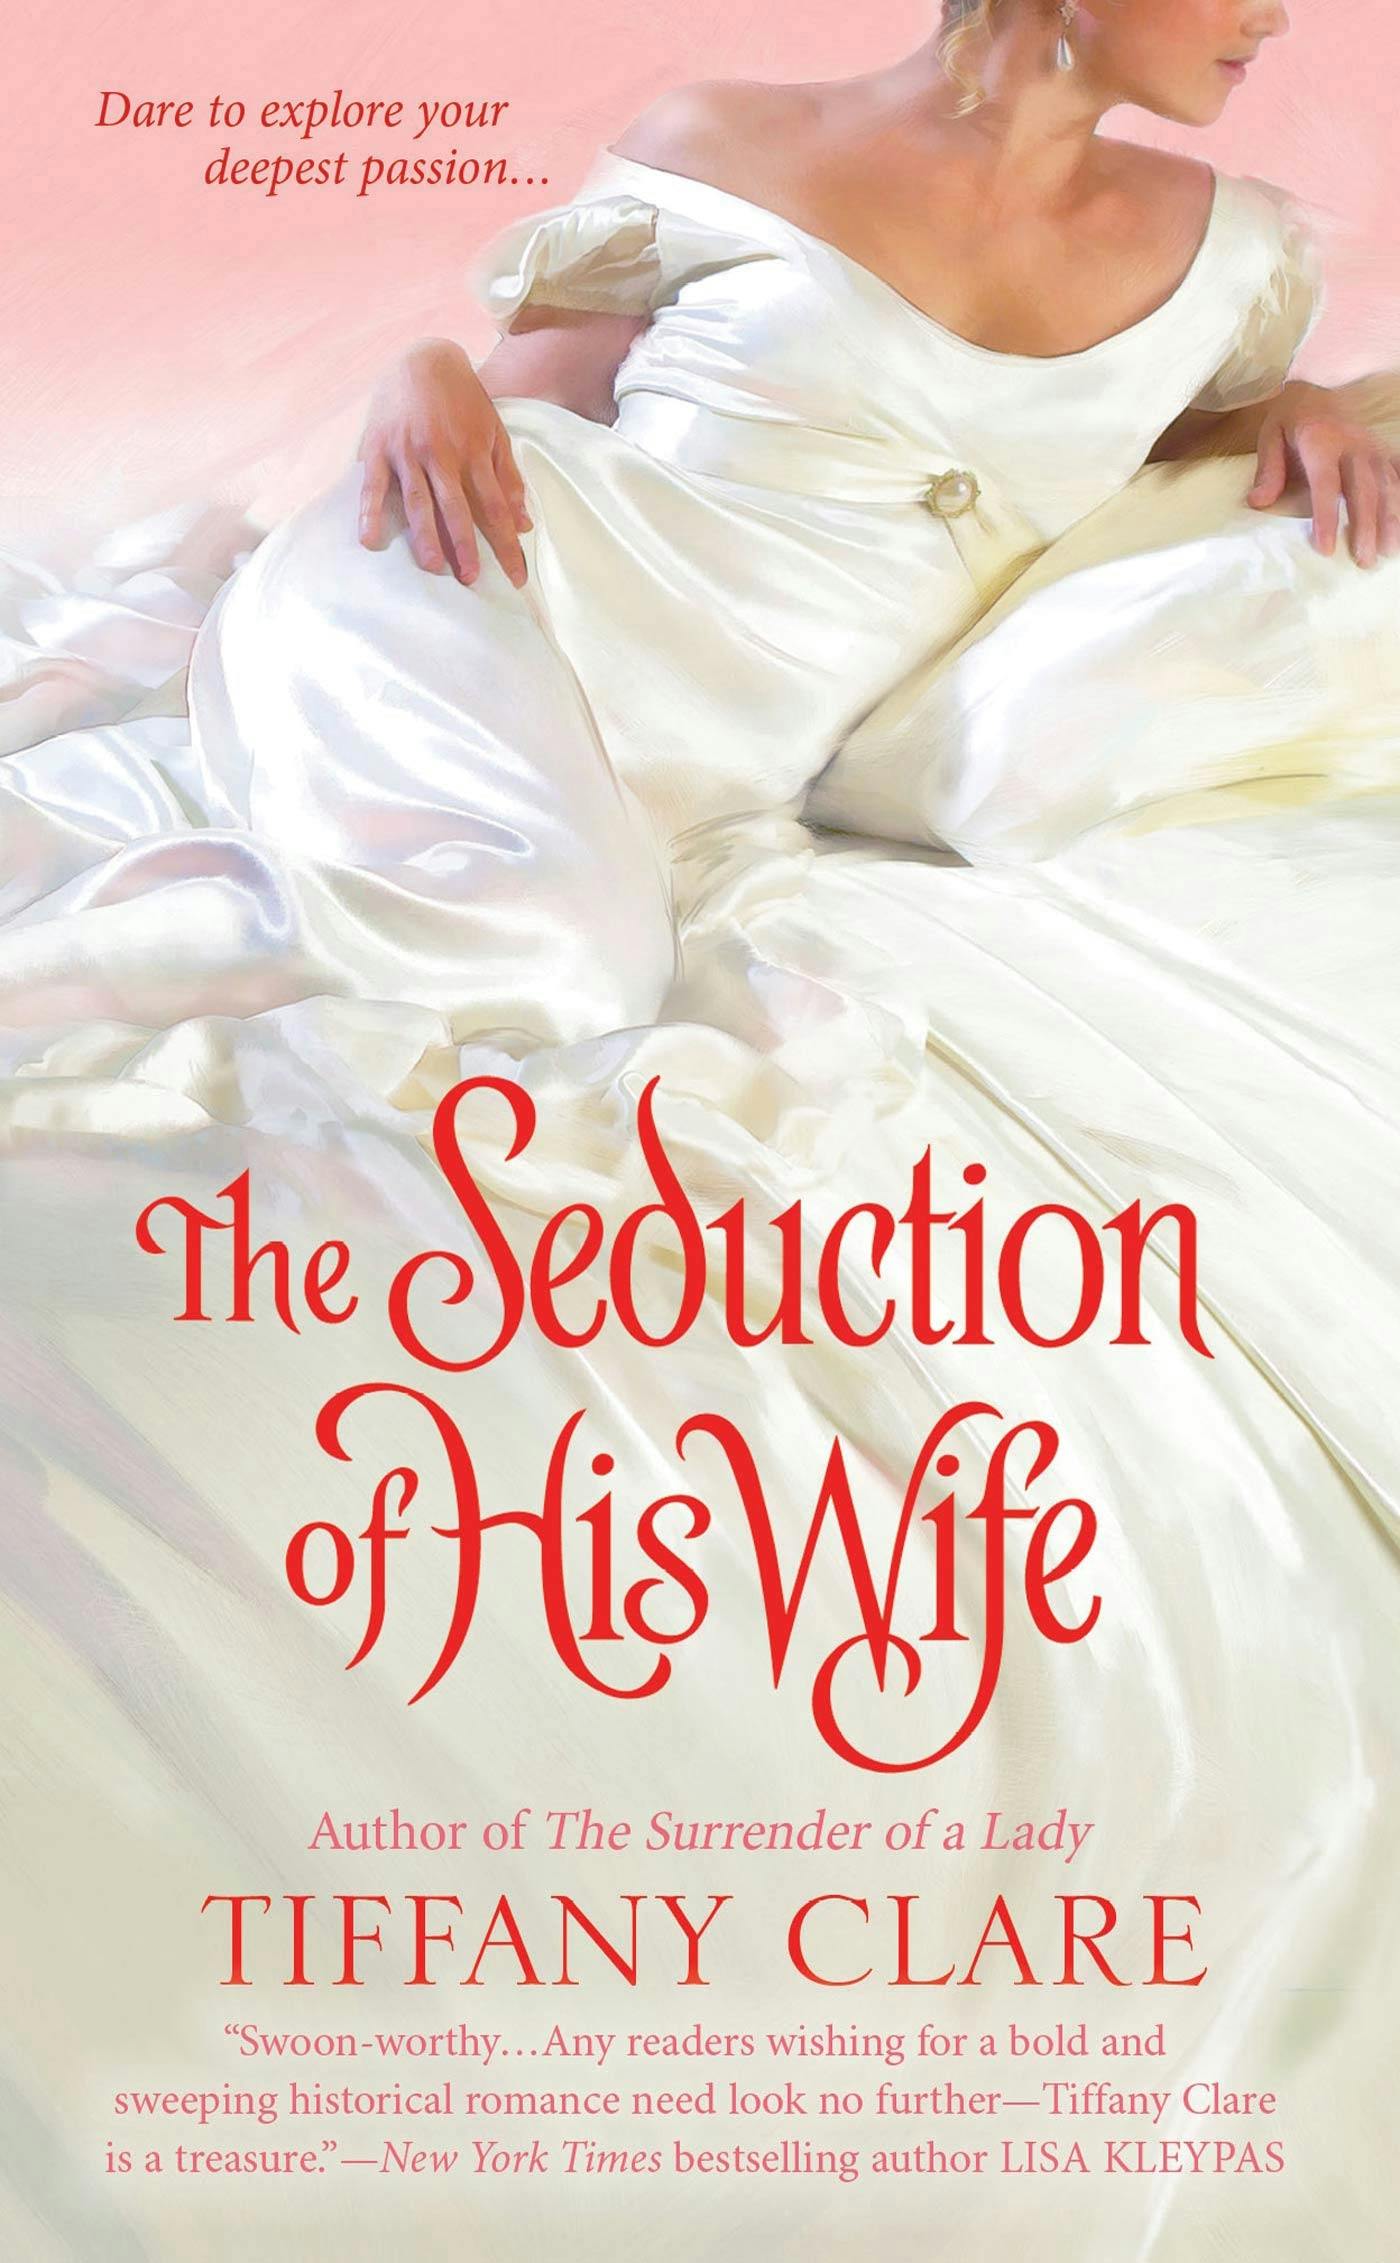 The Seduction of His Wife pic